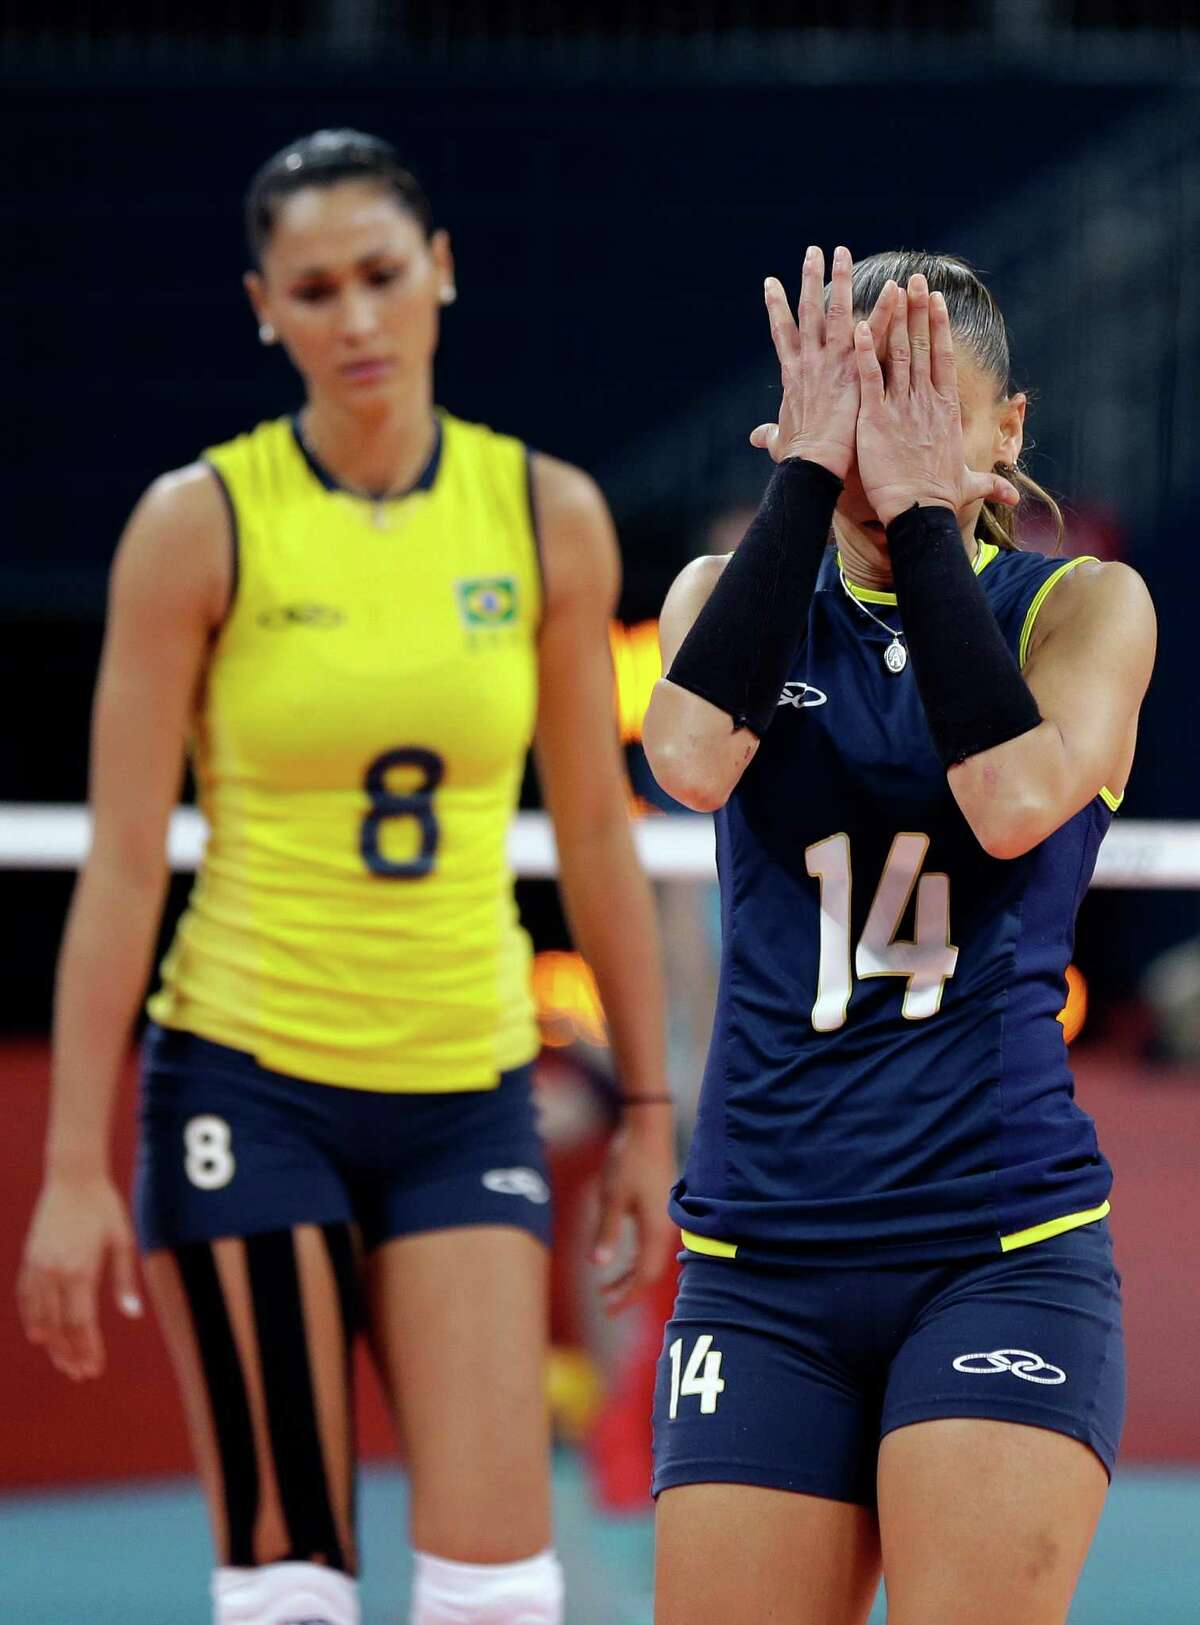 Brazil's Fabiana Oliveira (14) and Jaqueline Carvalho (8) react as the USA scores a point during a women's volleyball gold medal match at the 2012 Summer Olympics Saturday, Aug. 11, 2012, in London. (AP Photo/Chris O'Meara)